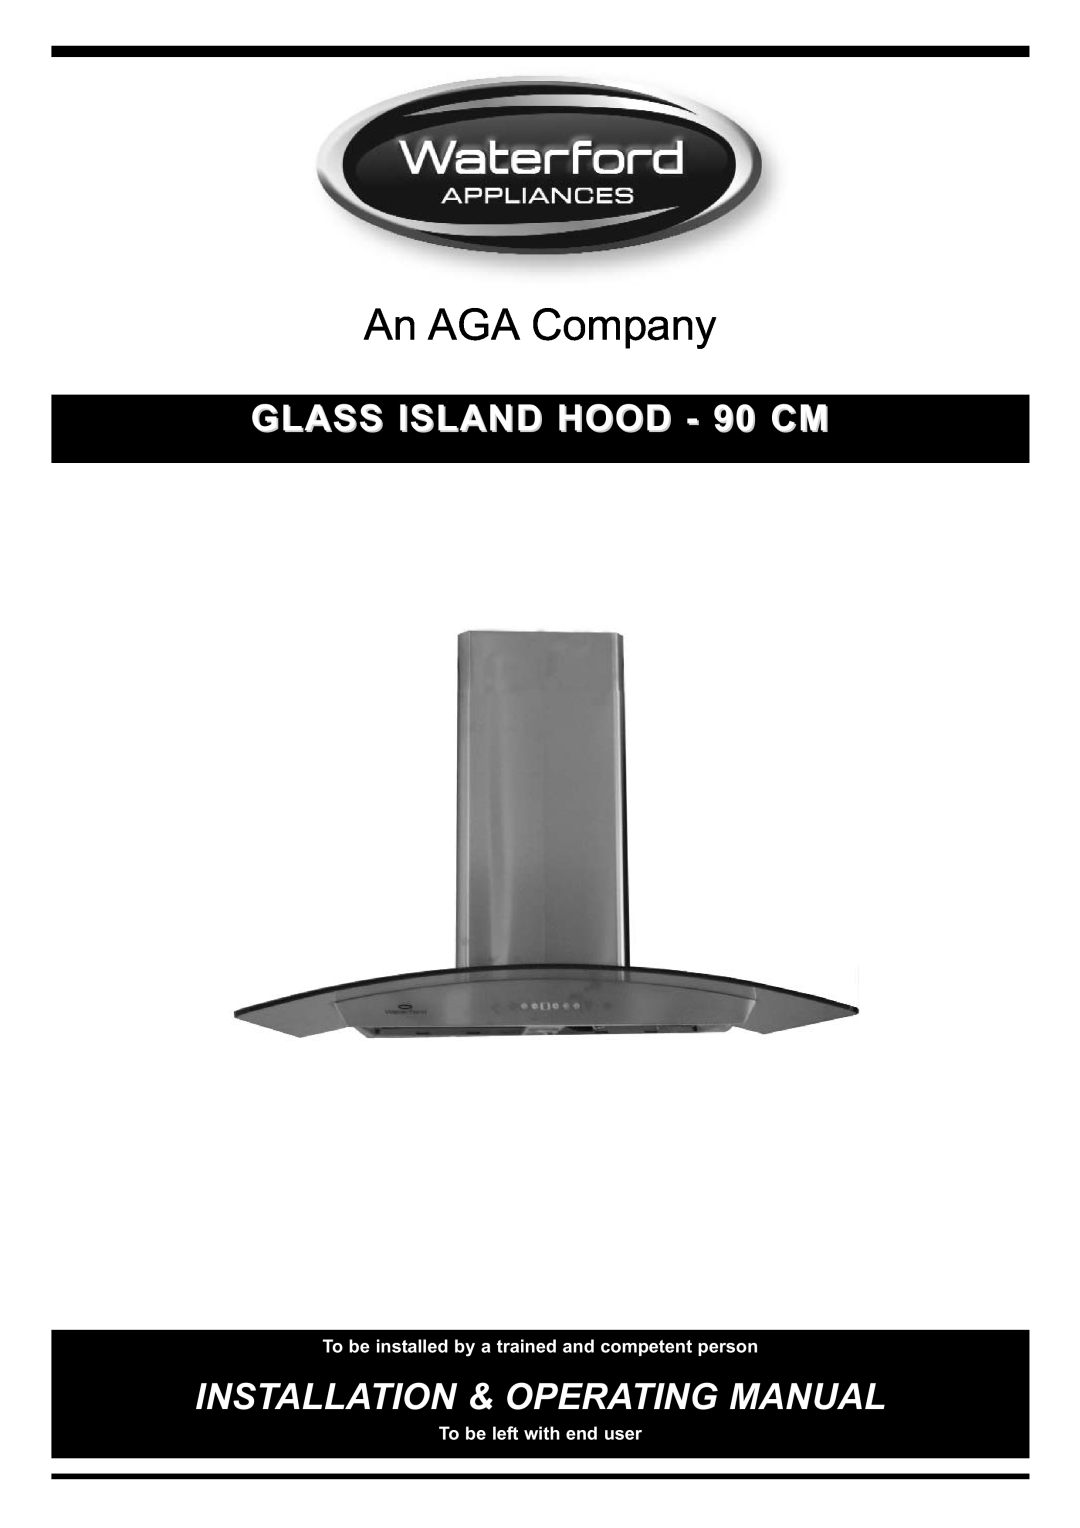 Waterford Precision Cycles Glass Island Hood manual An AGA Company, GLASS ISLAND HOOD - 90 CM, To be left with end user 